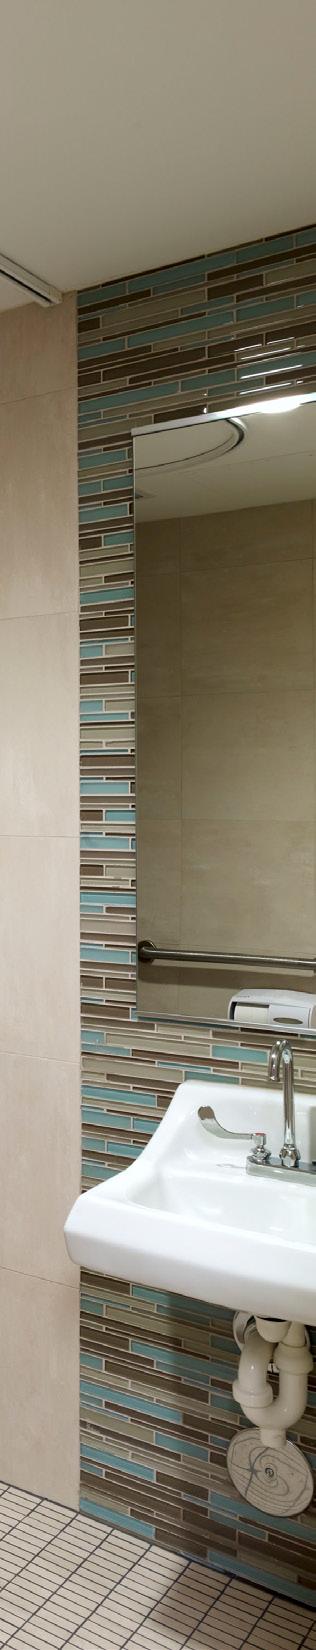 Cost Ceramic tile, particularly porcelain, is an expensive option since it utilizes premium materials. The high durability and minimized maintenance does bring the life cycle cost down.